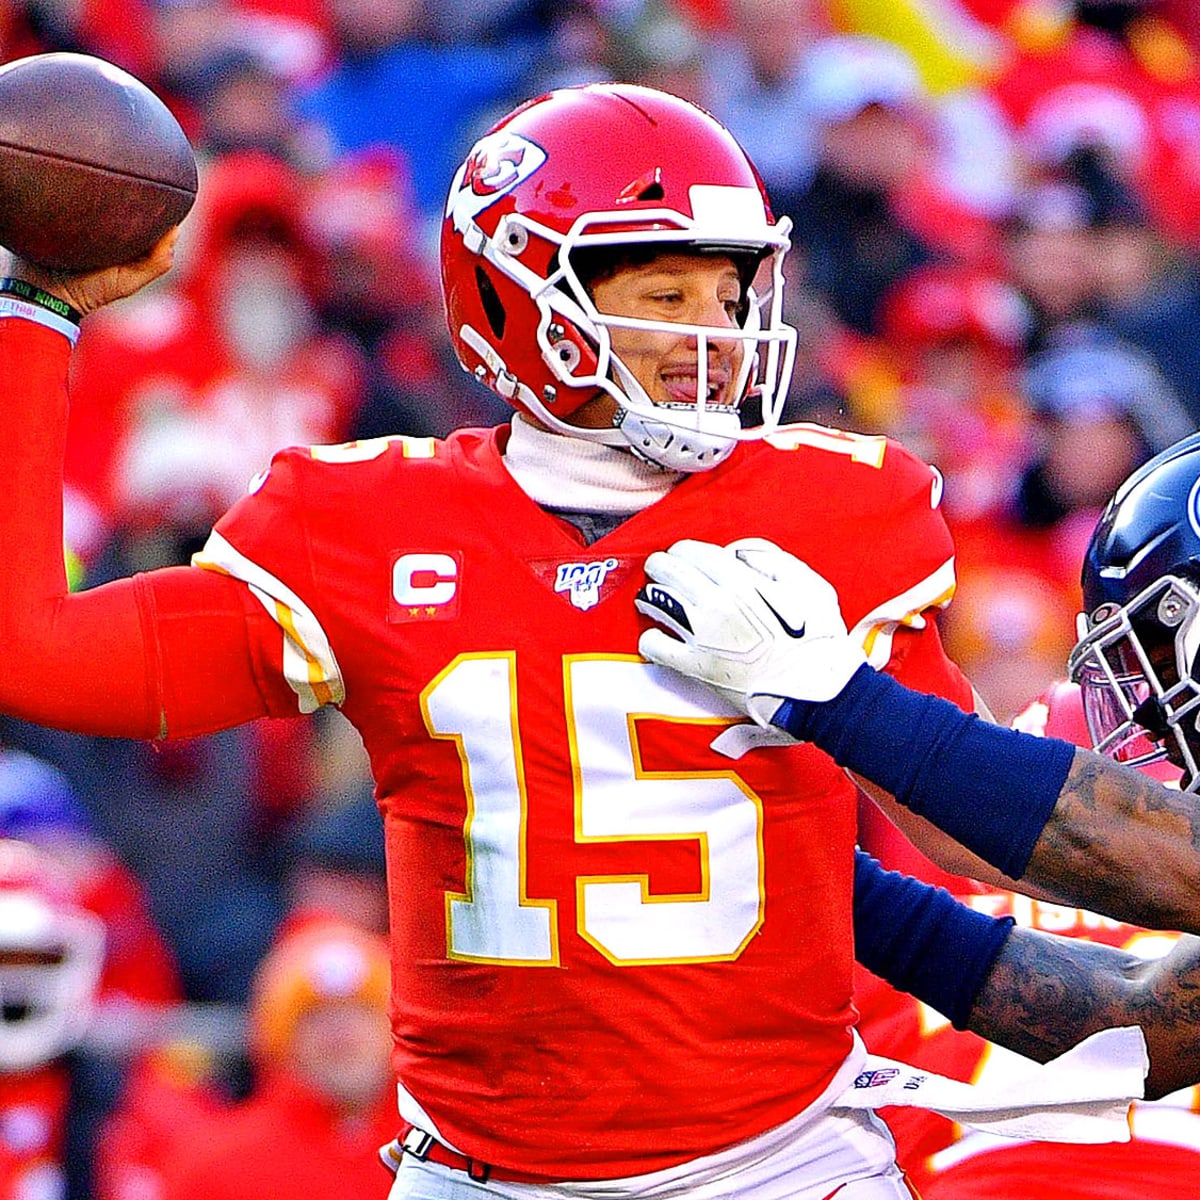 Patrick Mahomes' NFL career was this close to not happening